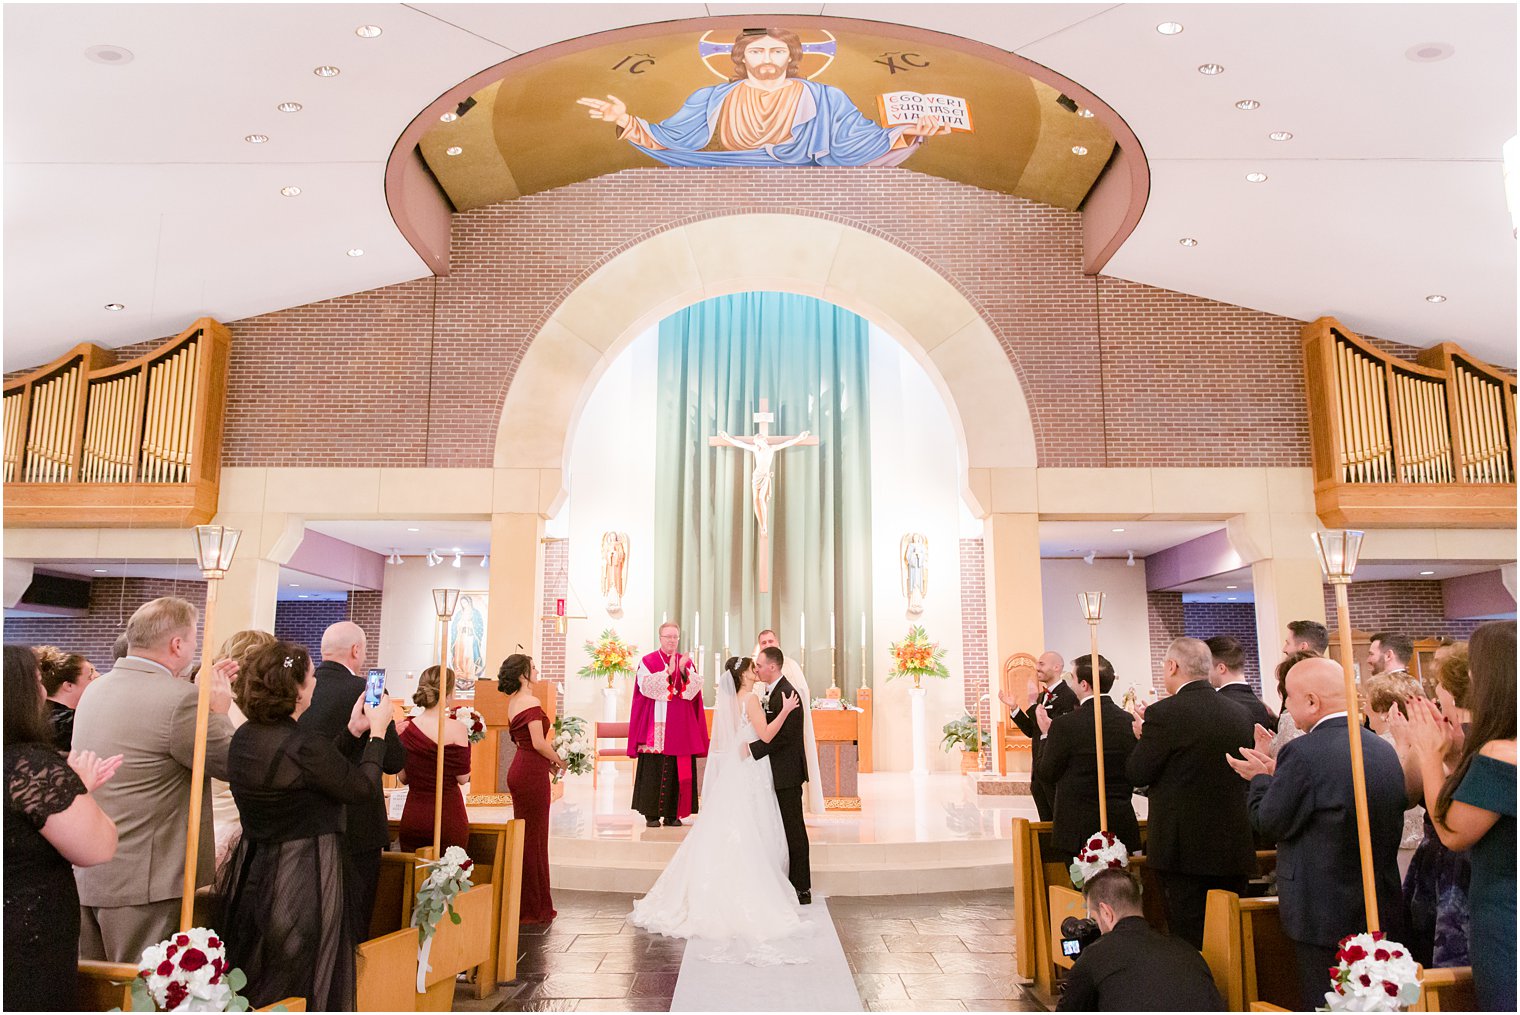 wedding ceremony in New Jersey church photographed by Idalia Photography 